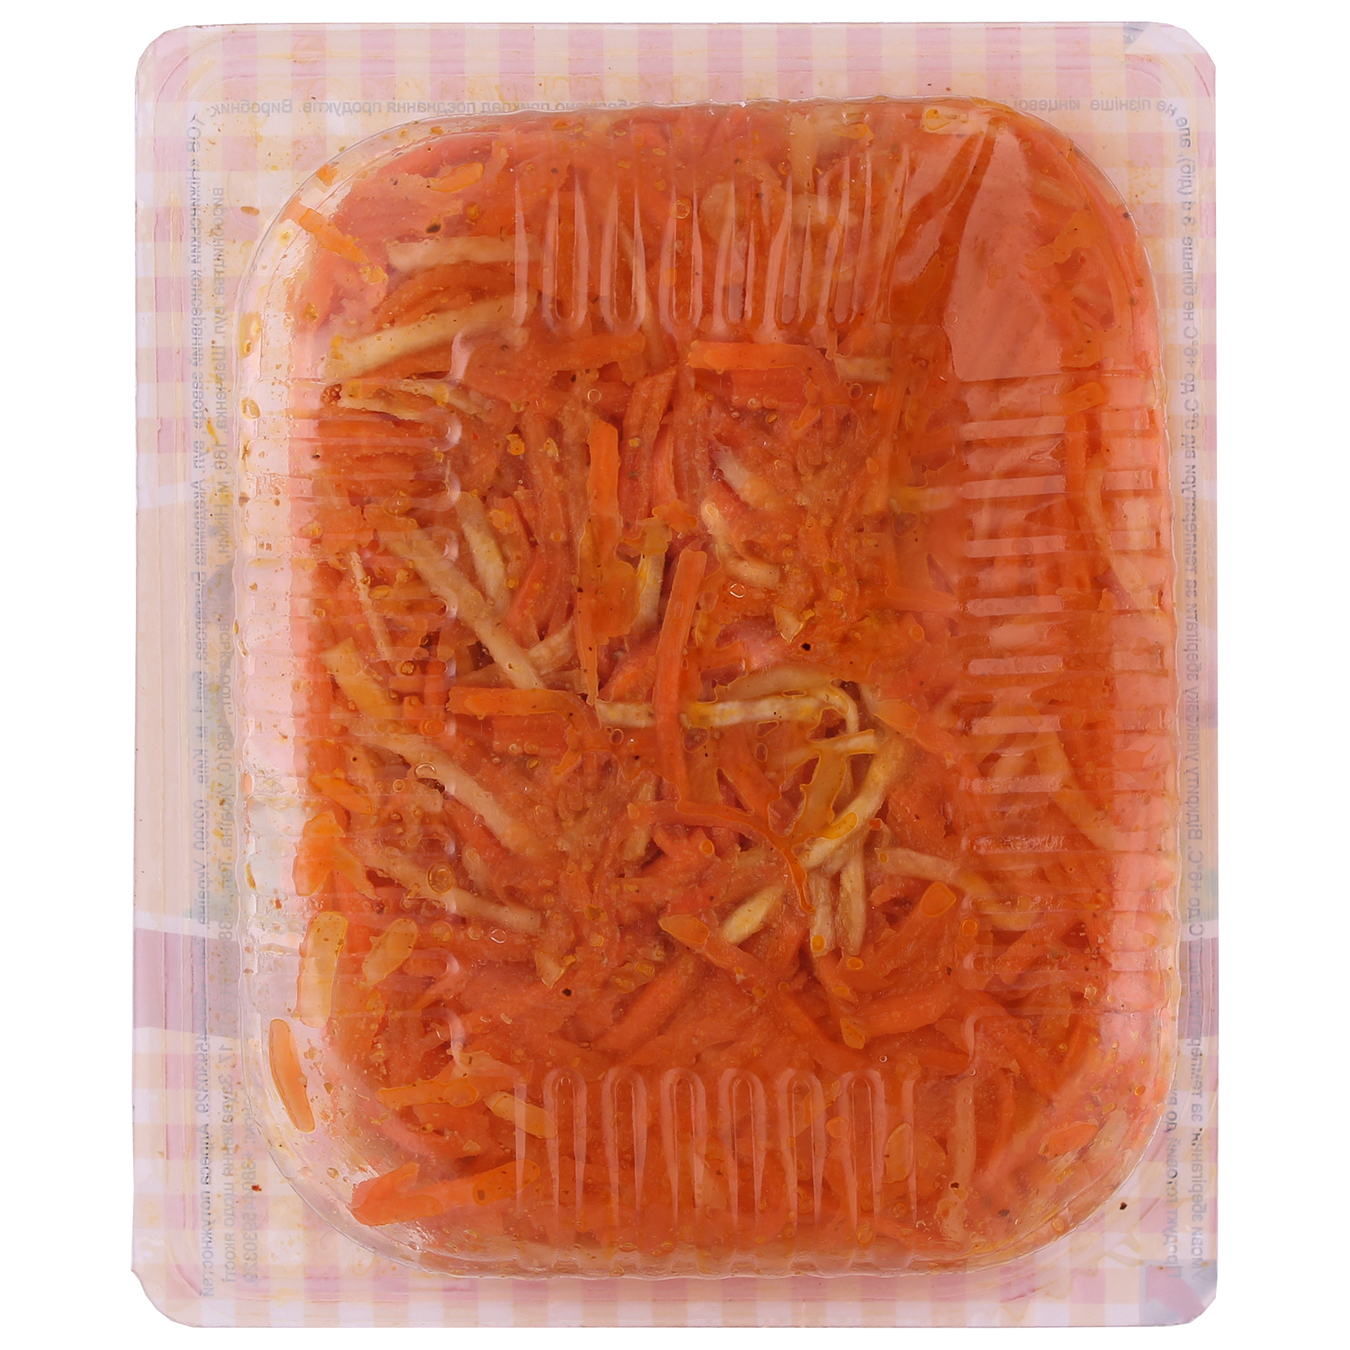 Greenville Korean carrot salad with celery 200g 2